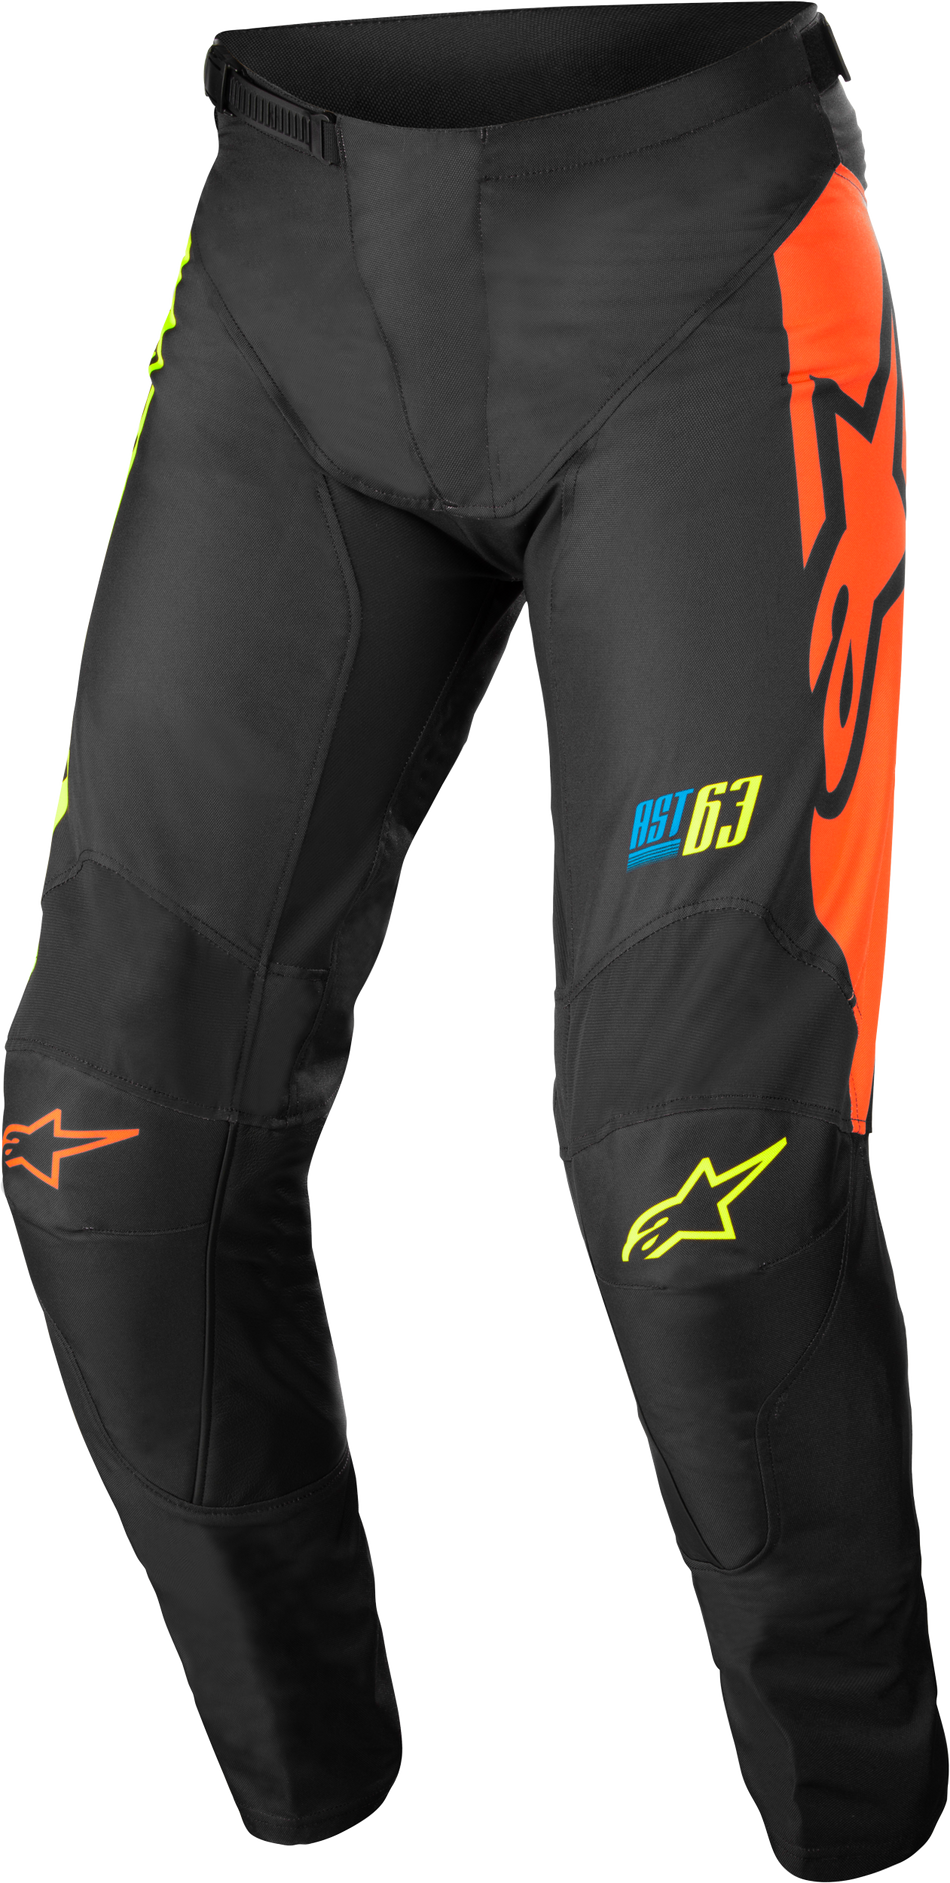 ALPINESTARS Youth Racer Compass Pants Black/Yellow Fluo/Coral Sz 28 3742122-1534-28